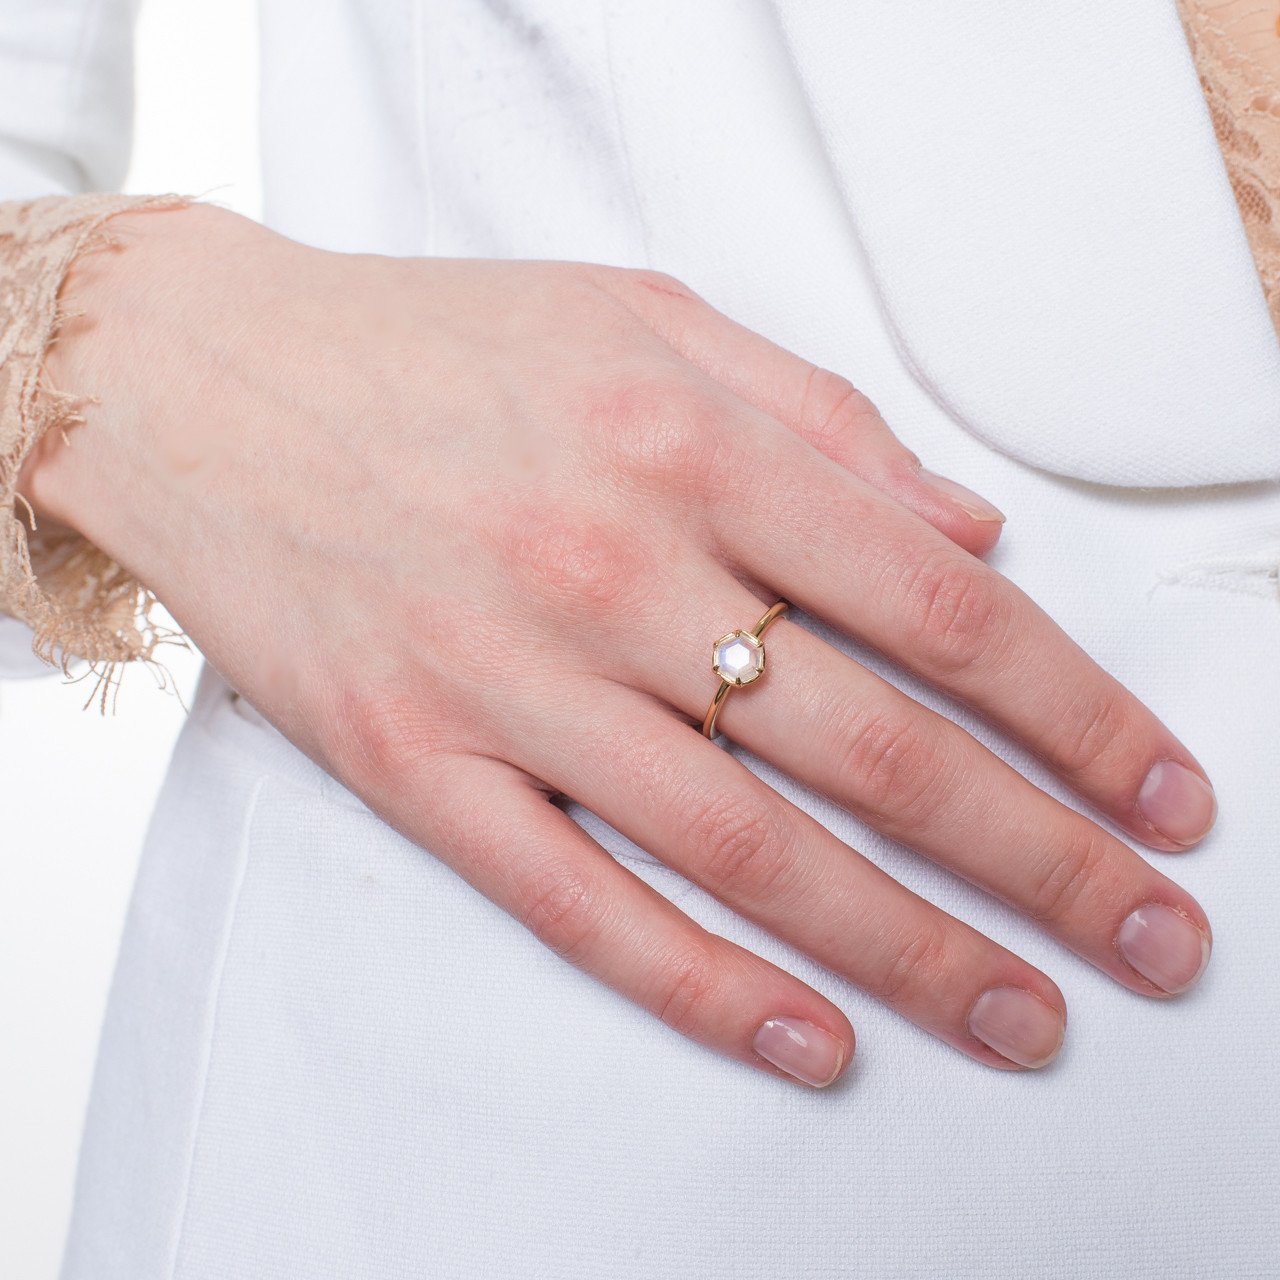 GRACE RING RAINBOW MOONSTONE & GOLD - SO PRETTY CARA COTTER